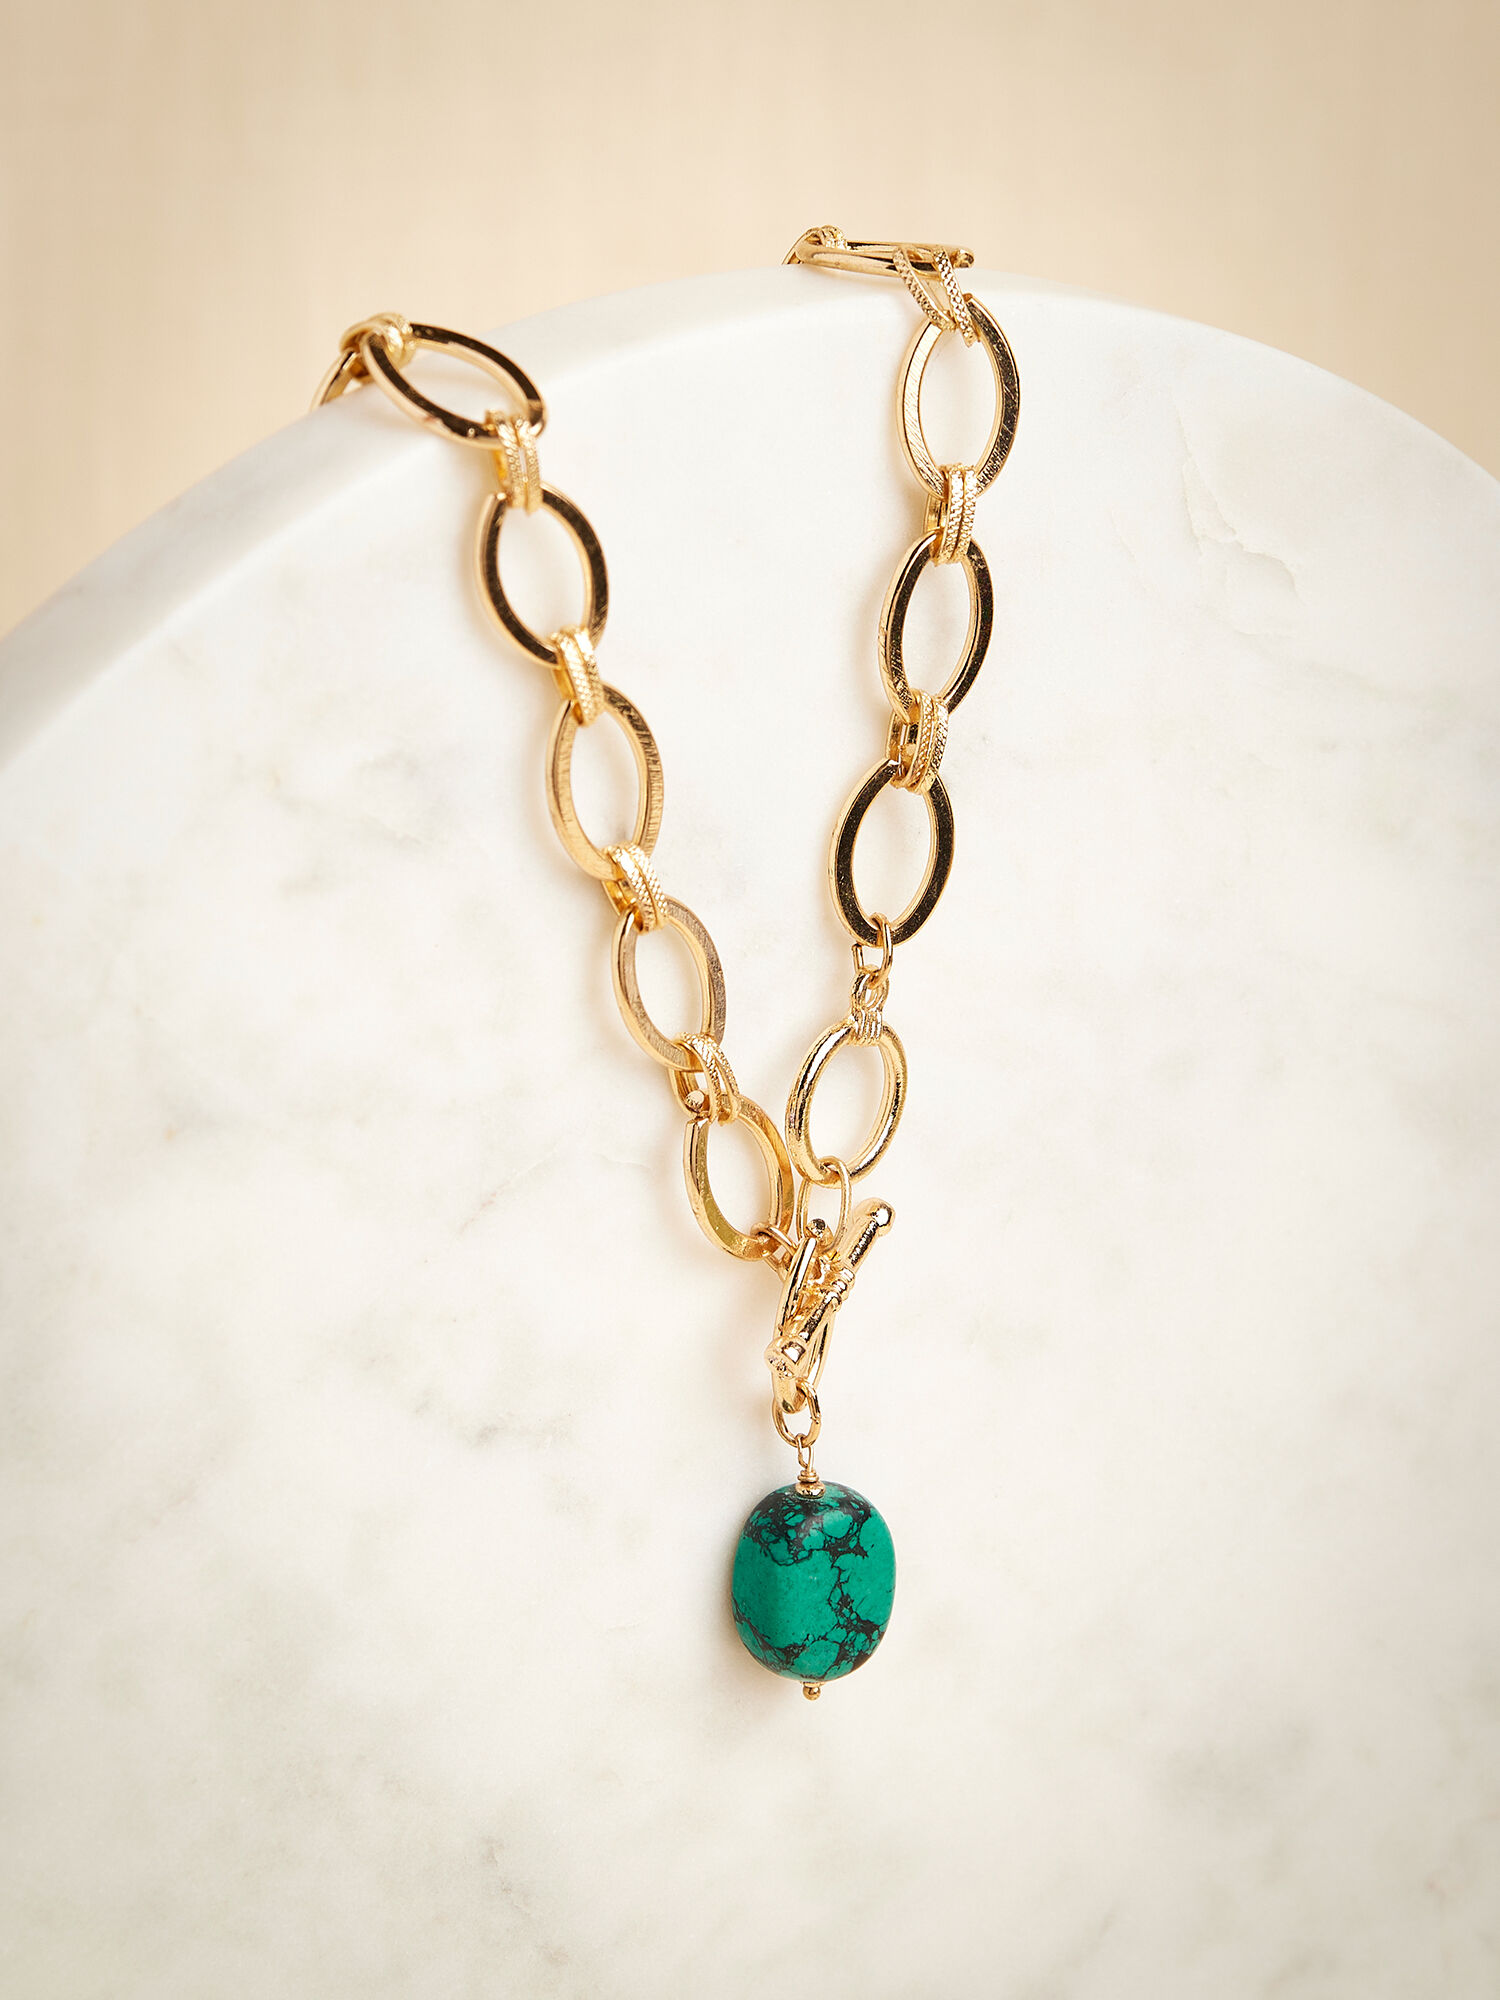 Two tone green onyx delicate drop necklace | feliciawillow